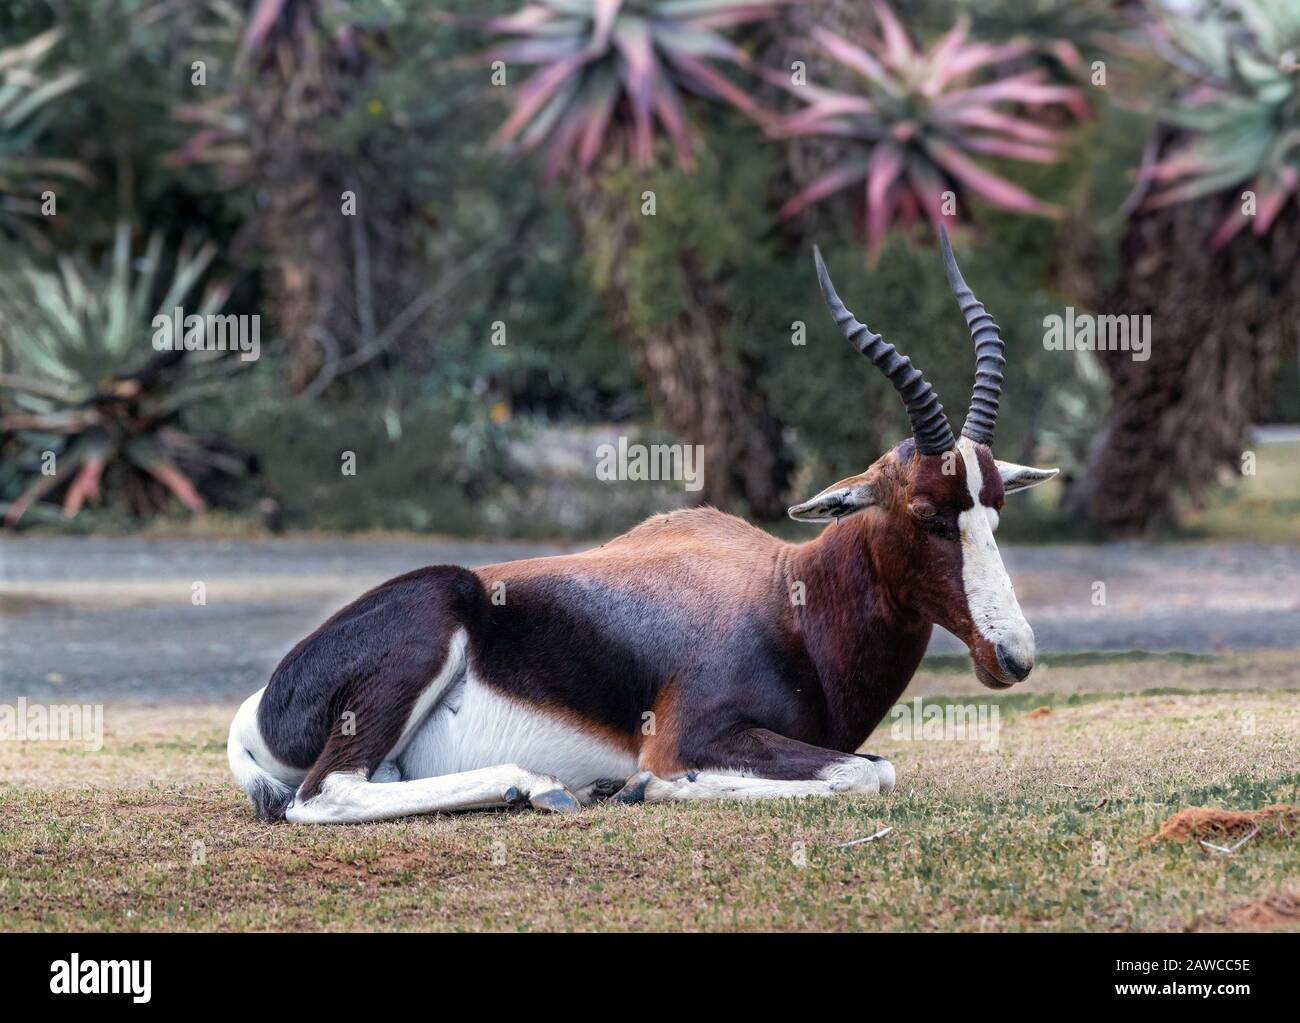 Bontebok resting in Bontebok National Park with aloes in the background, Swellendam, Western Cape, South Africa Stock Photo